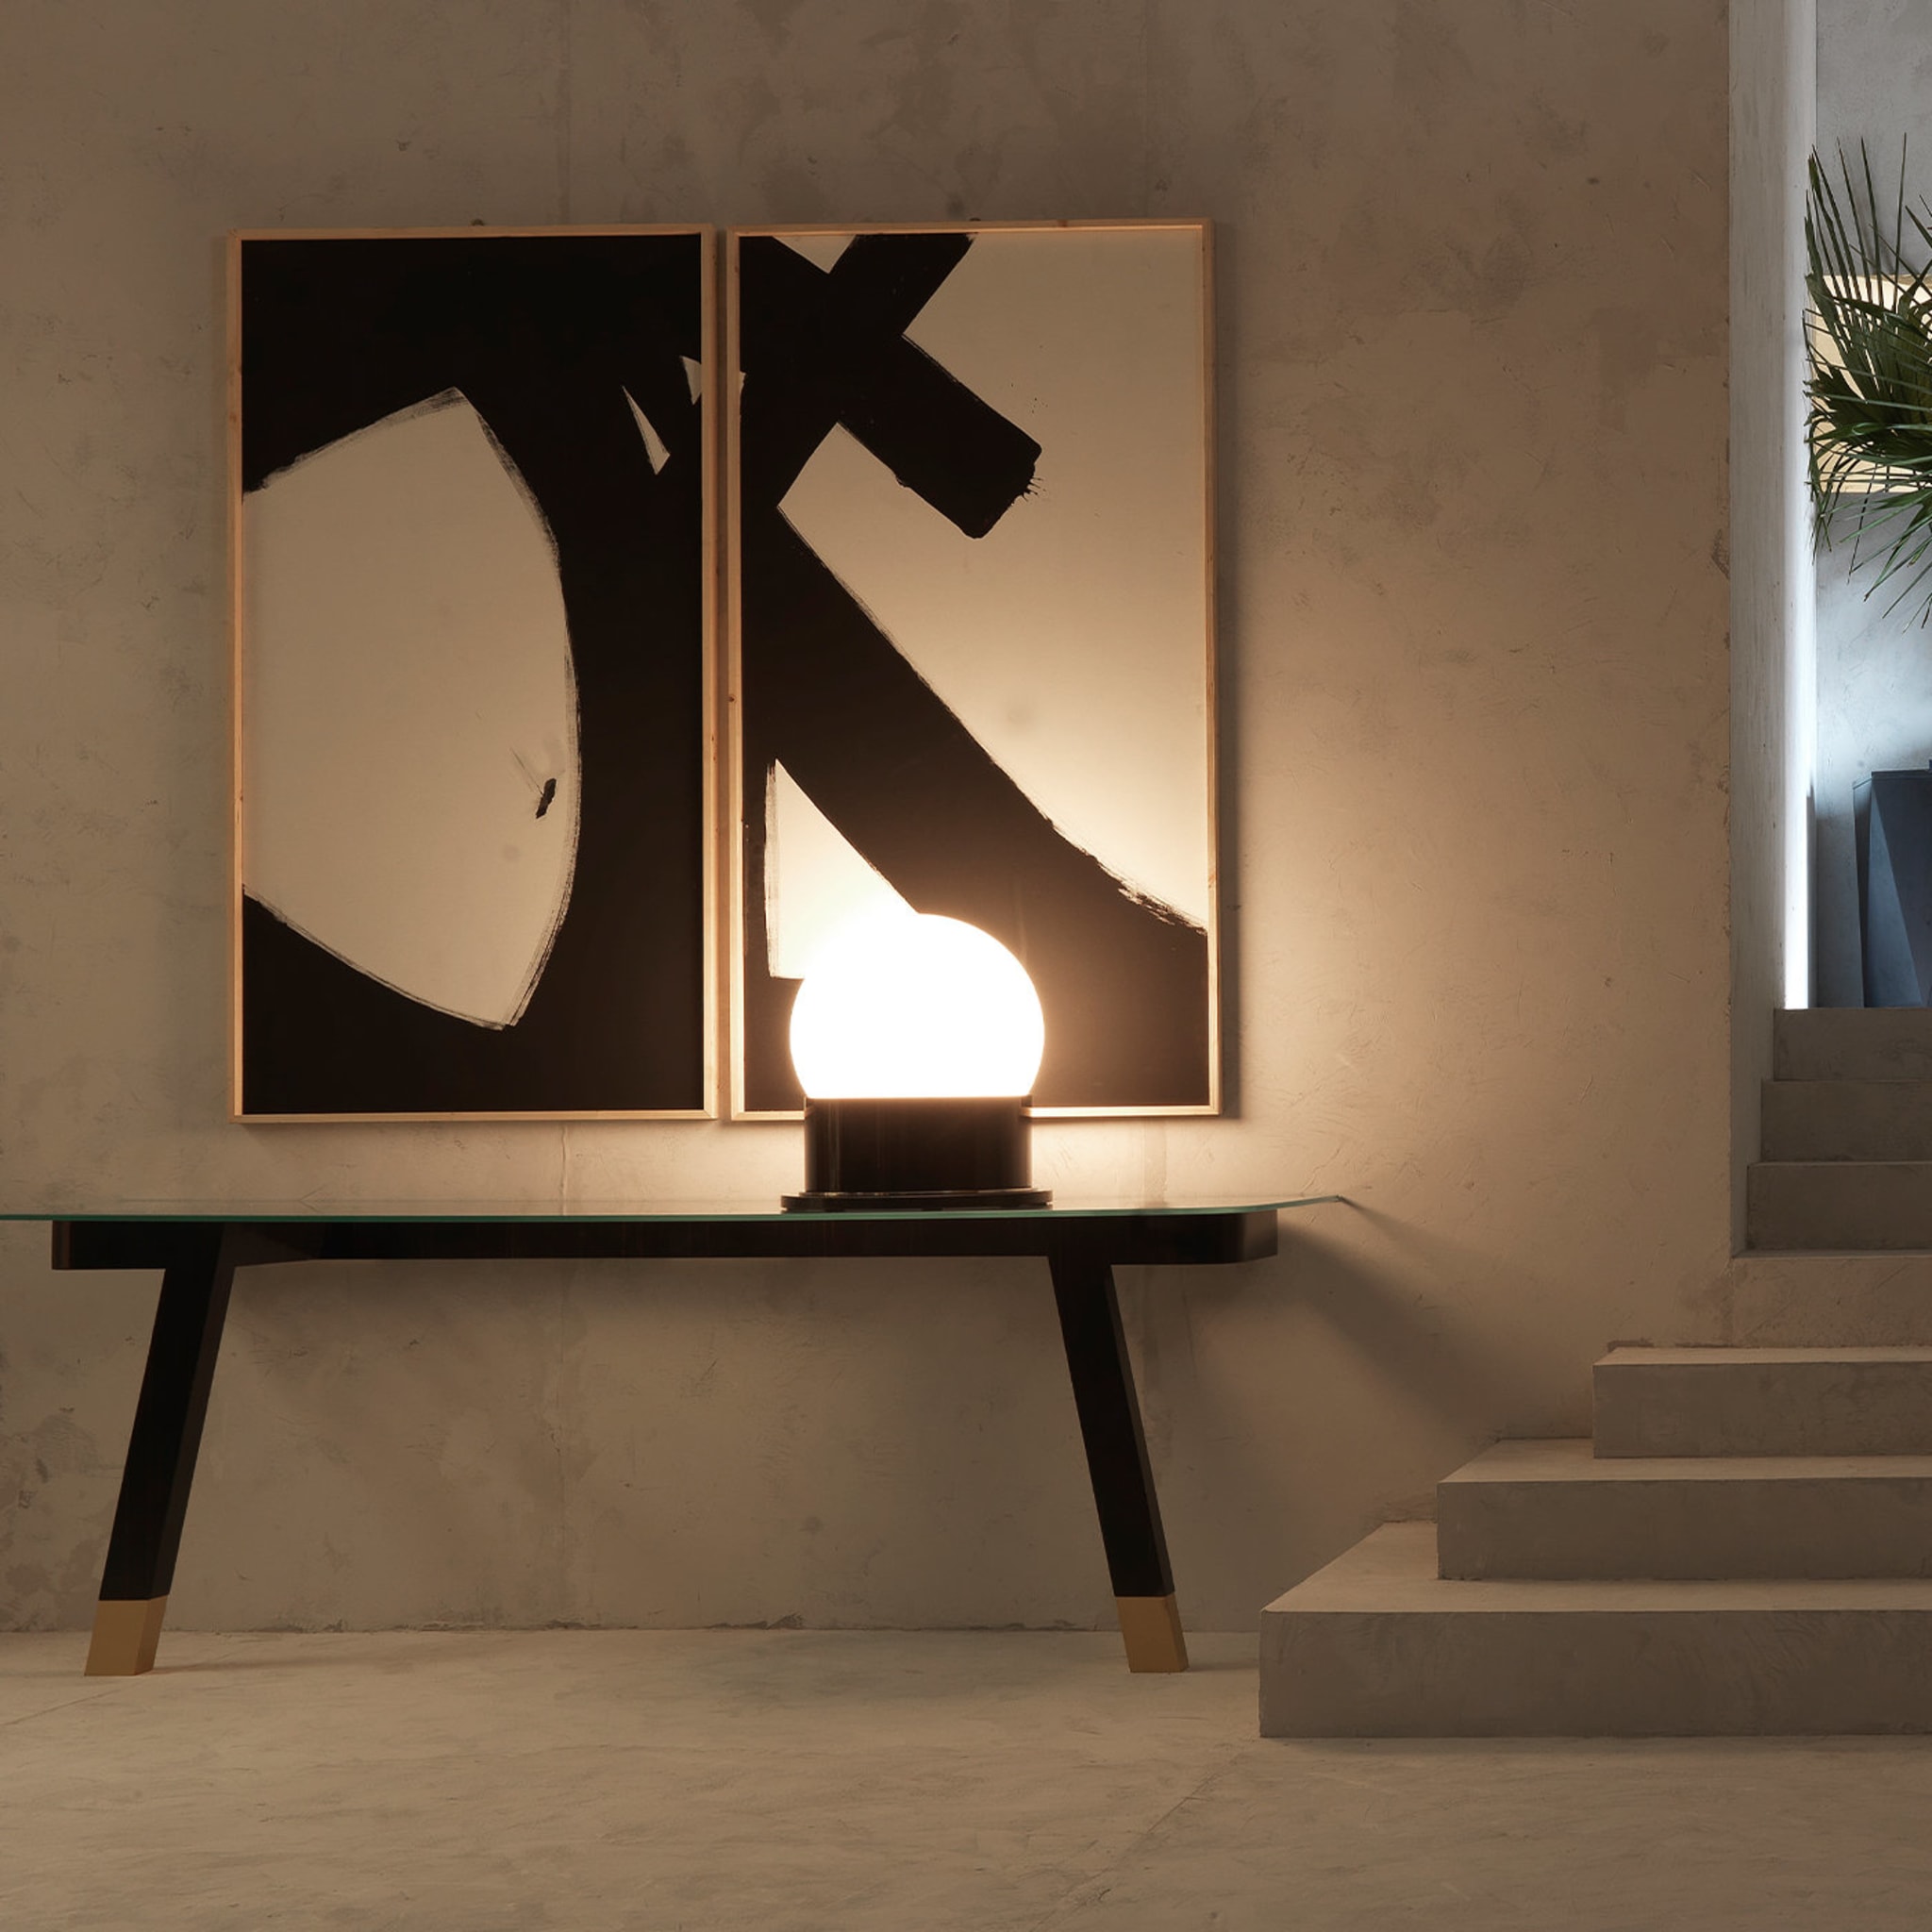 Maria Black Table Lamp by Ynterior Lab - Alternative view 2